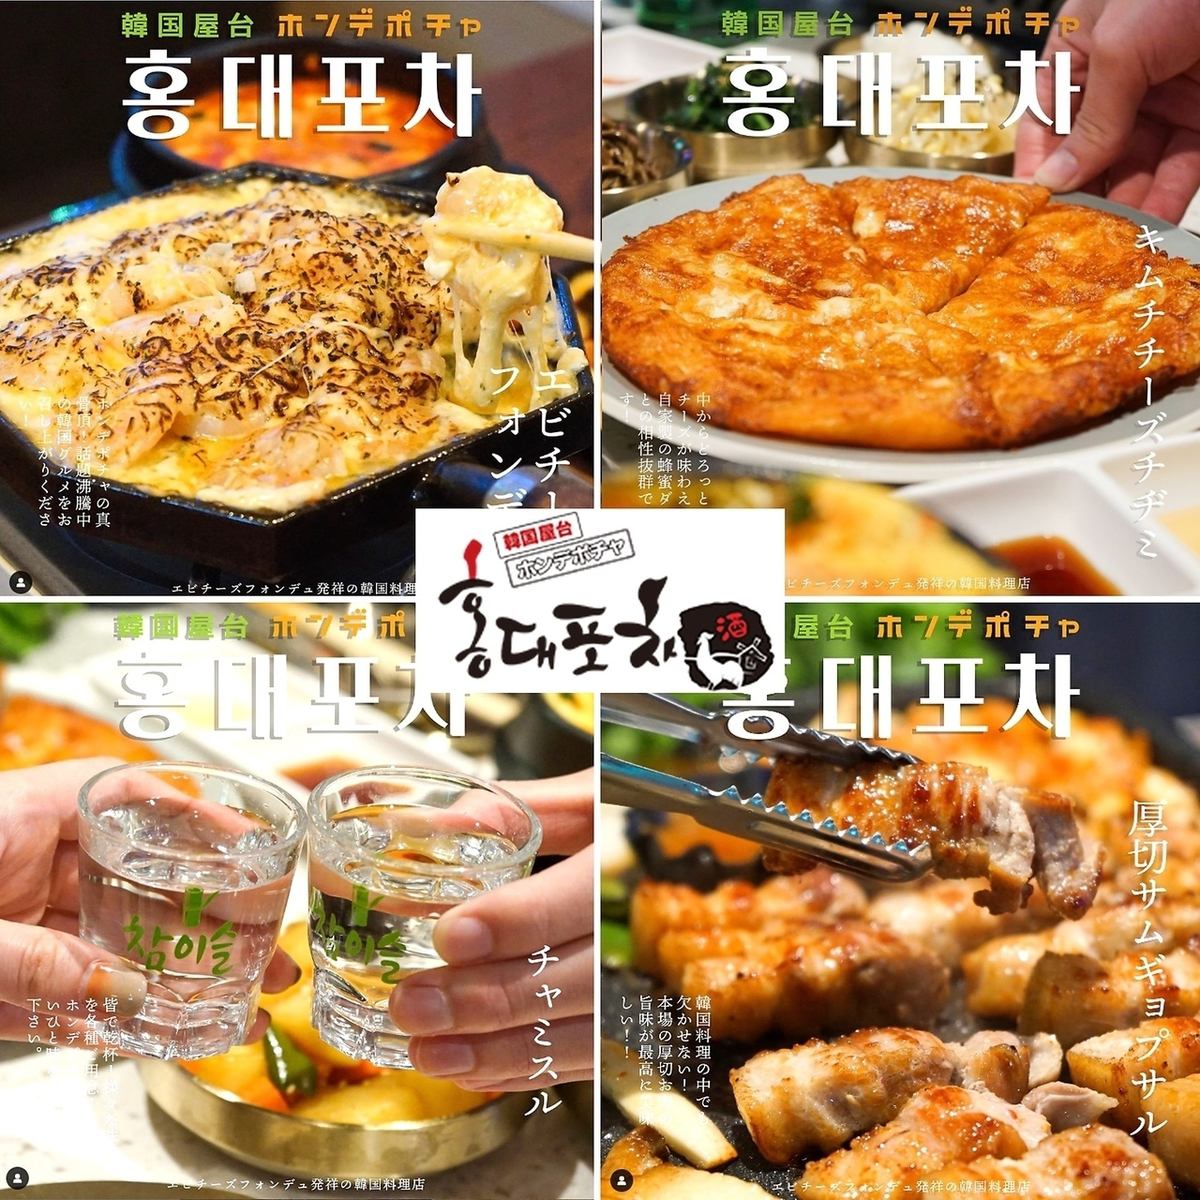 There are many menu items such as thick-sliced samgyeopsal, shrimp cheese fondue & cheese balls!